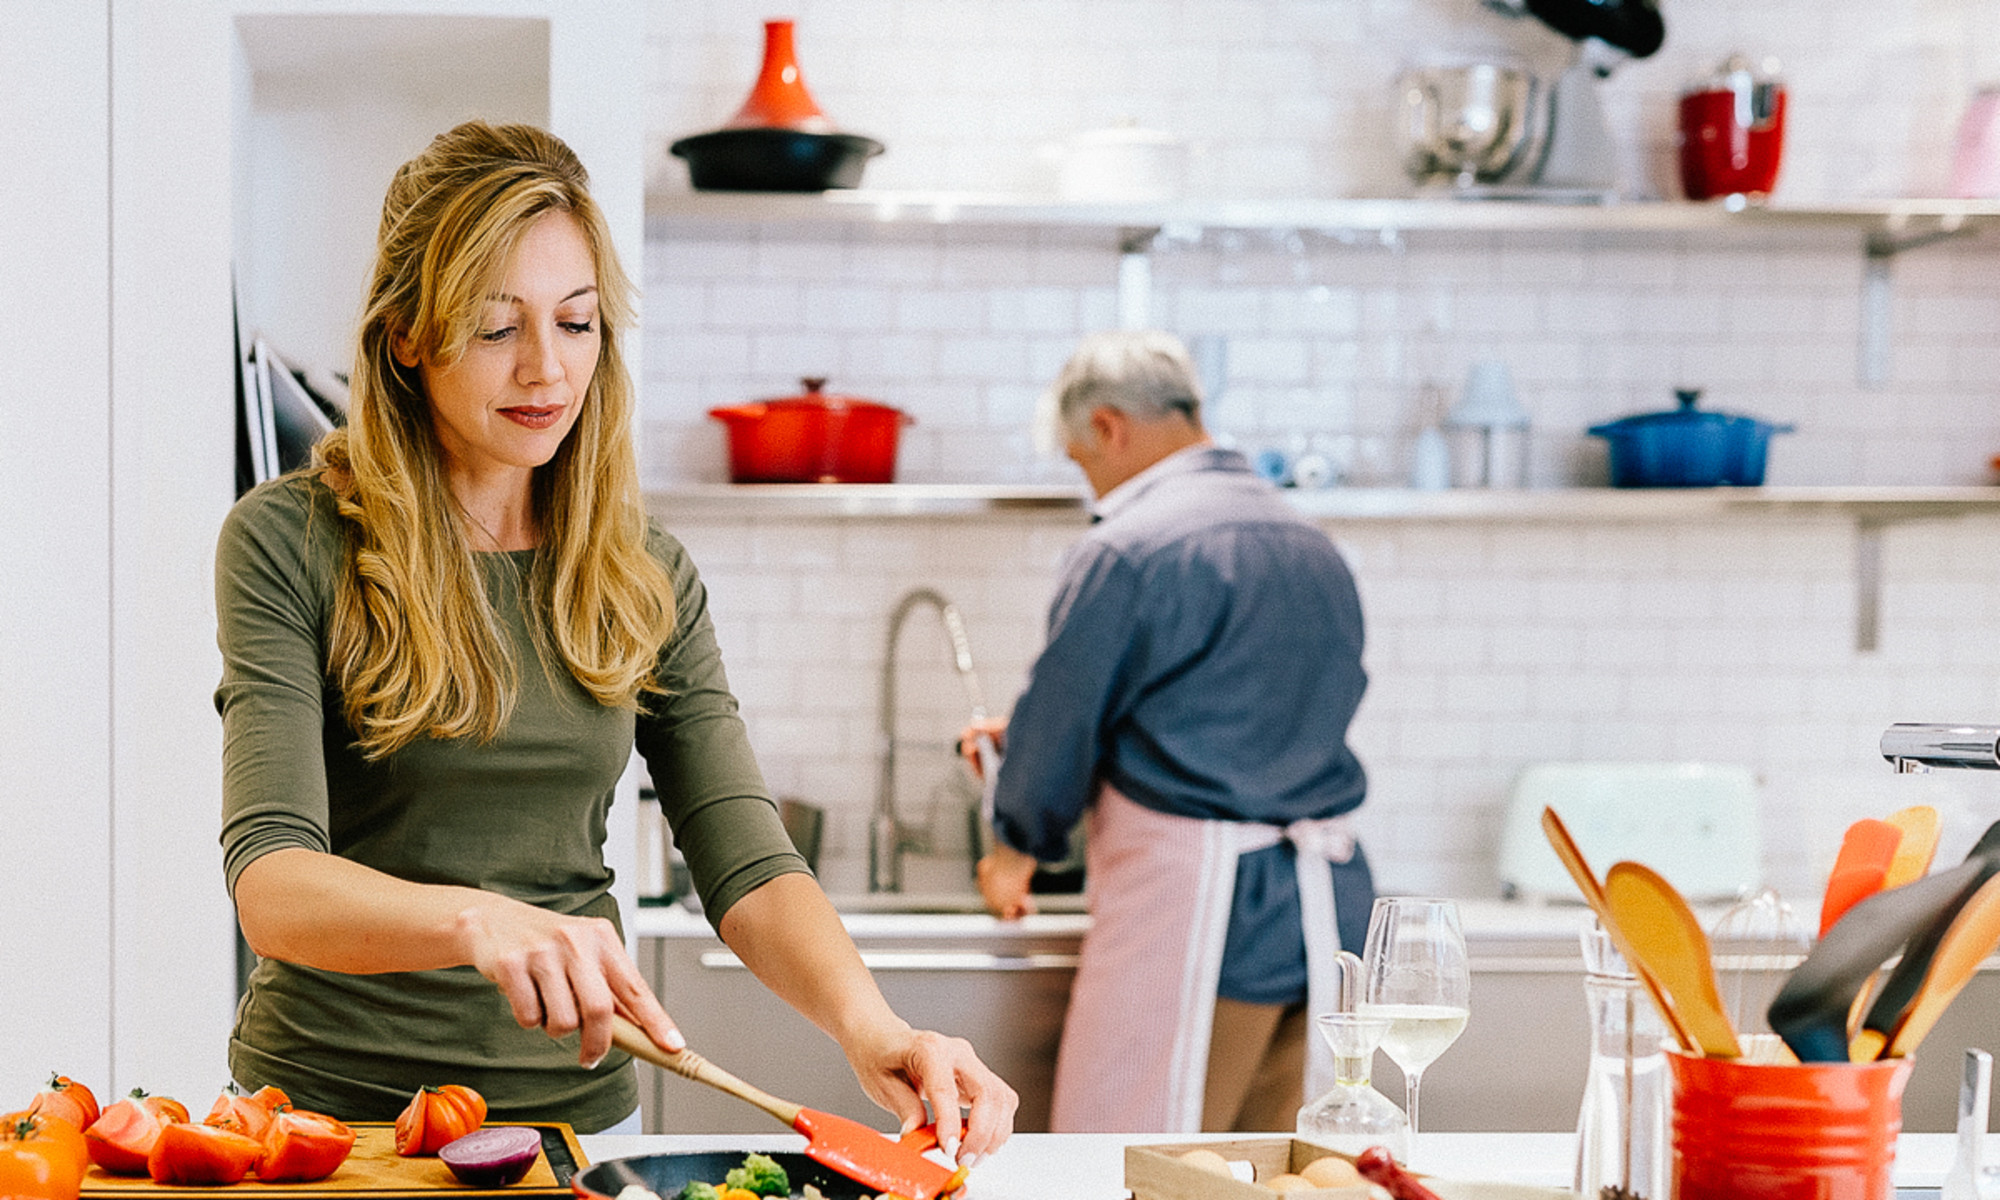 The Ultimate Guide To Learning To Share Housework Equally mindbodygreen